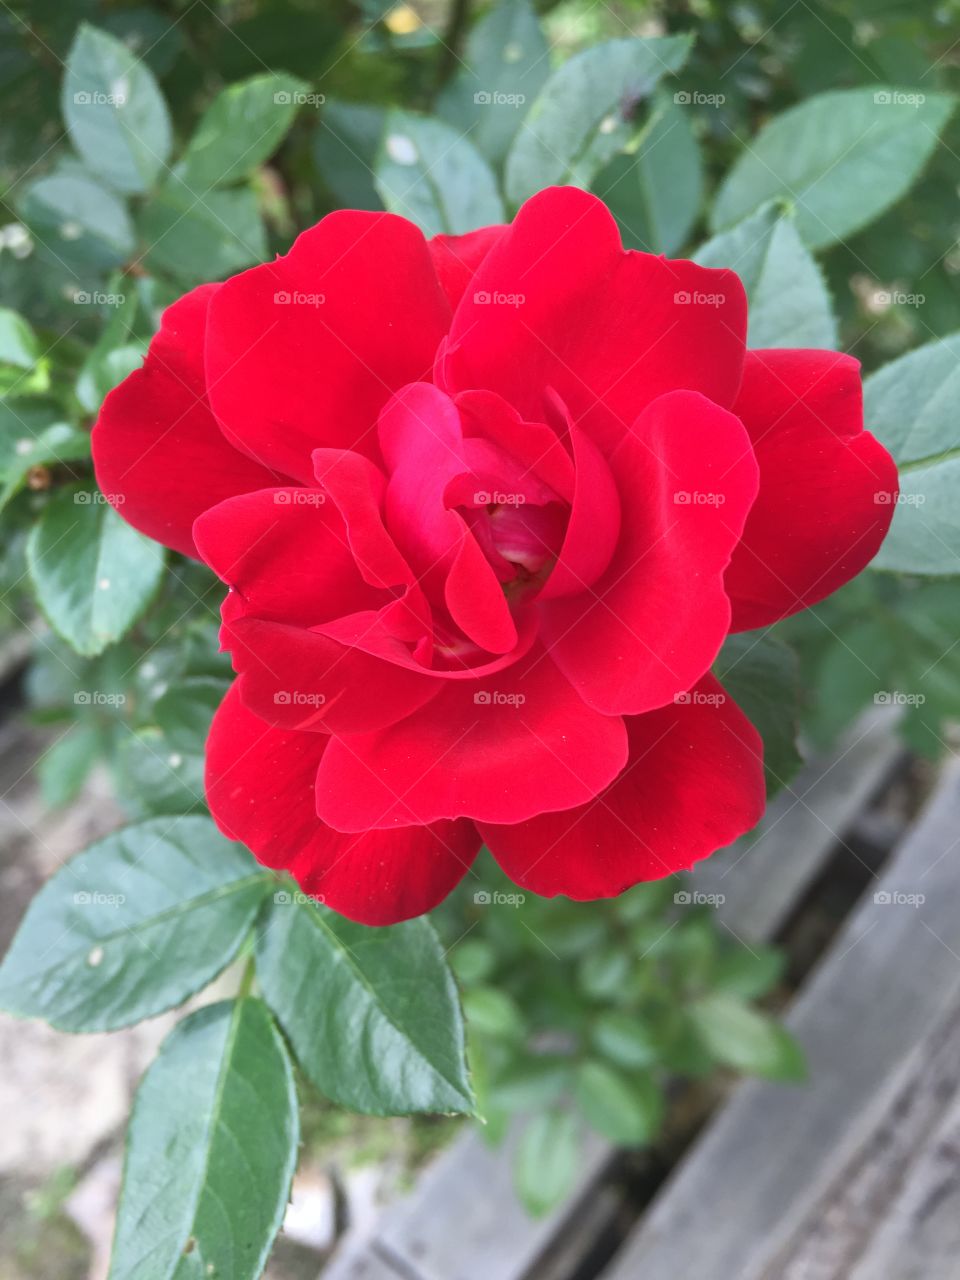 Beautiful fragrant red rose on a summers day.